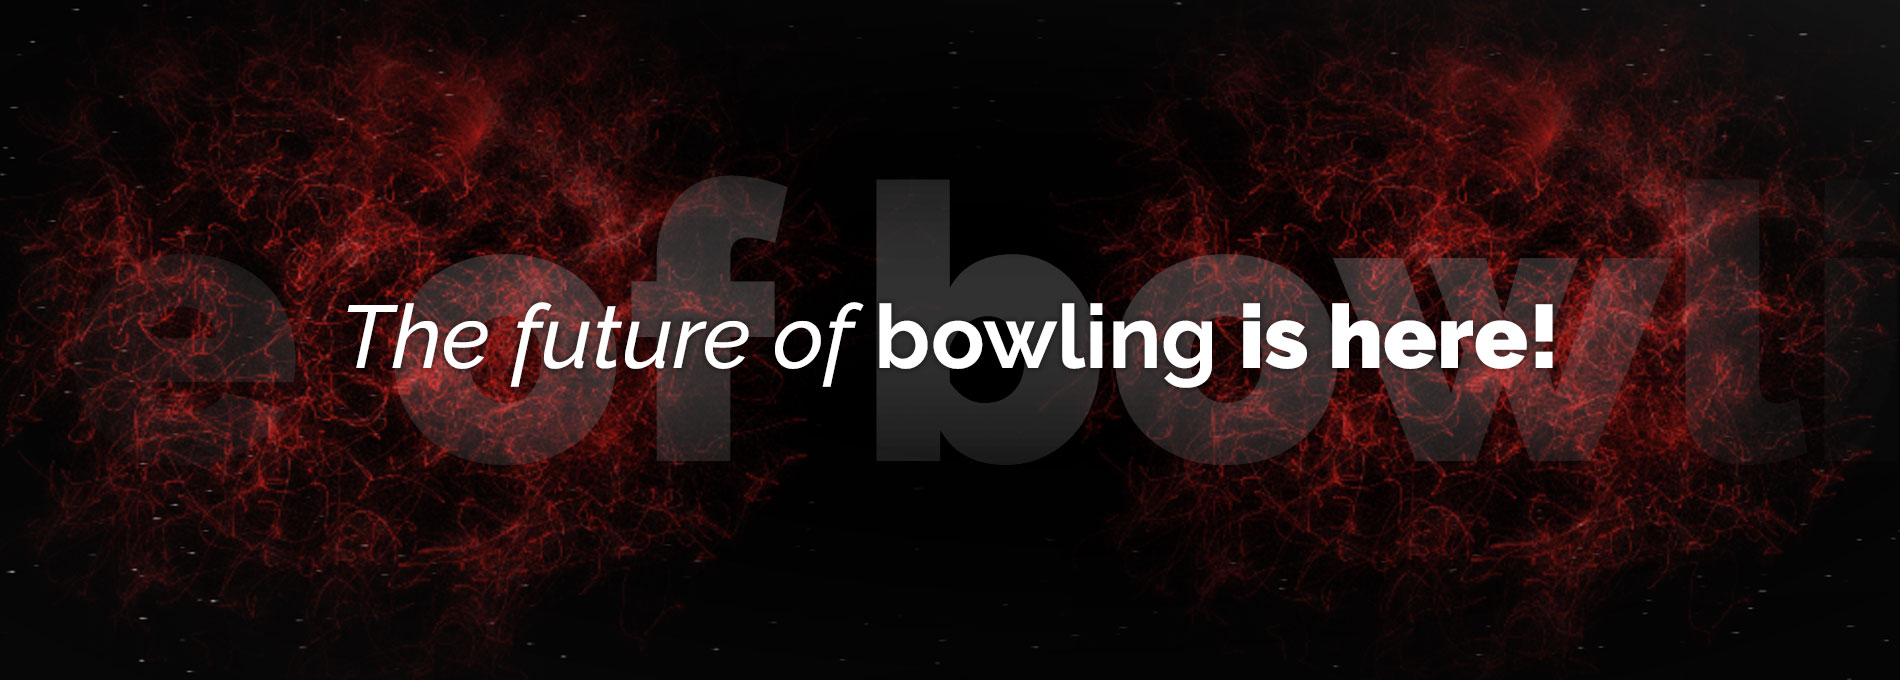 banner-qubicaamf-making-bowling-amazing-the-future-of-bowling-is-here